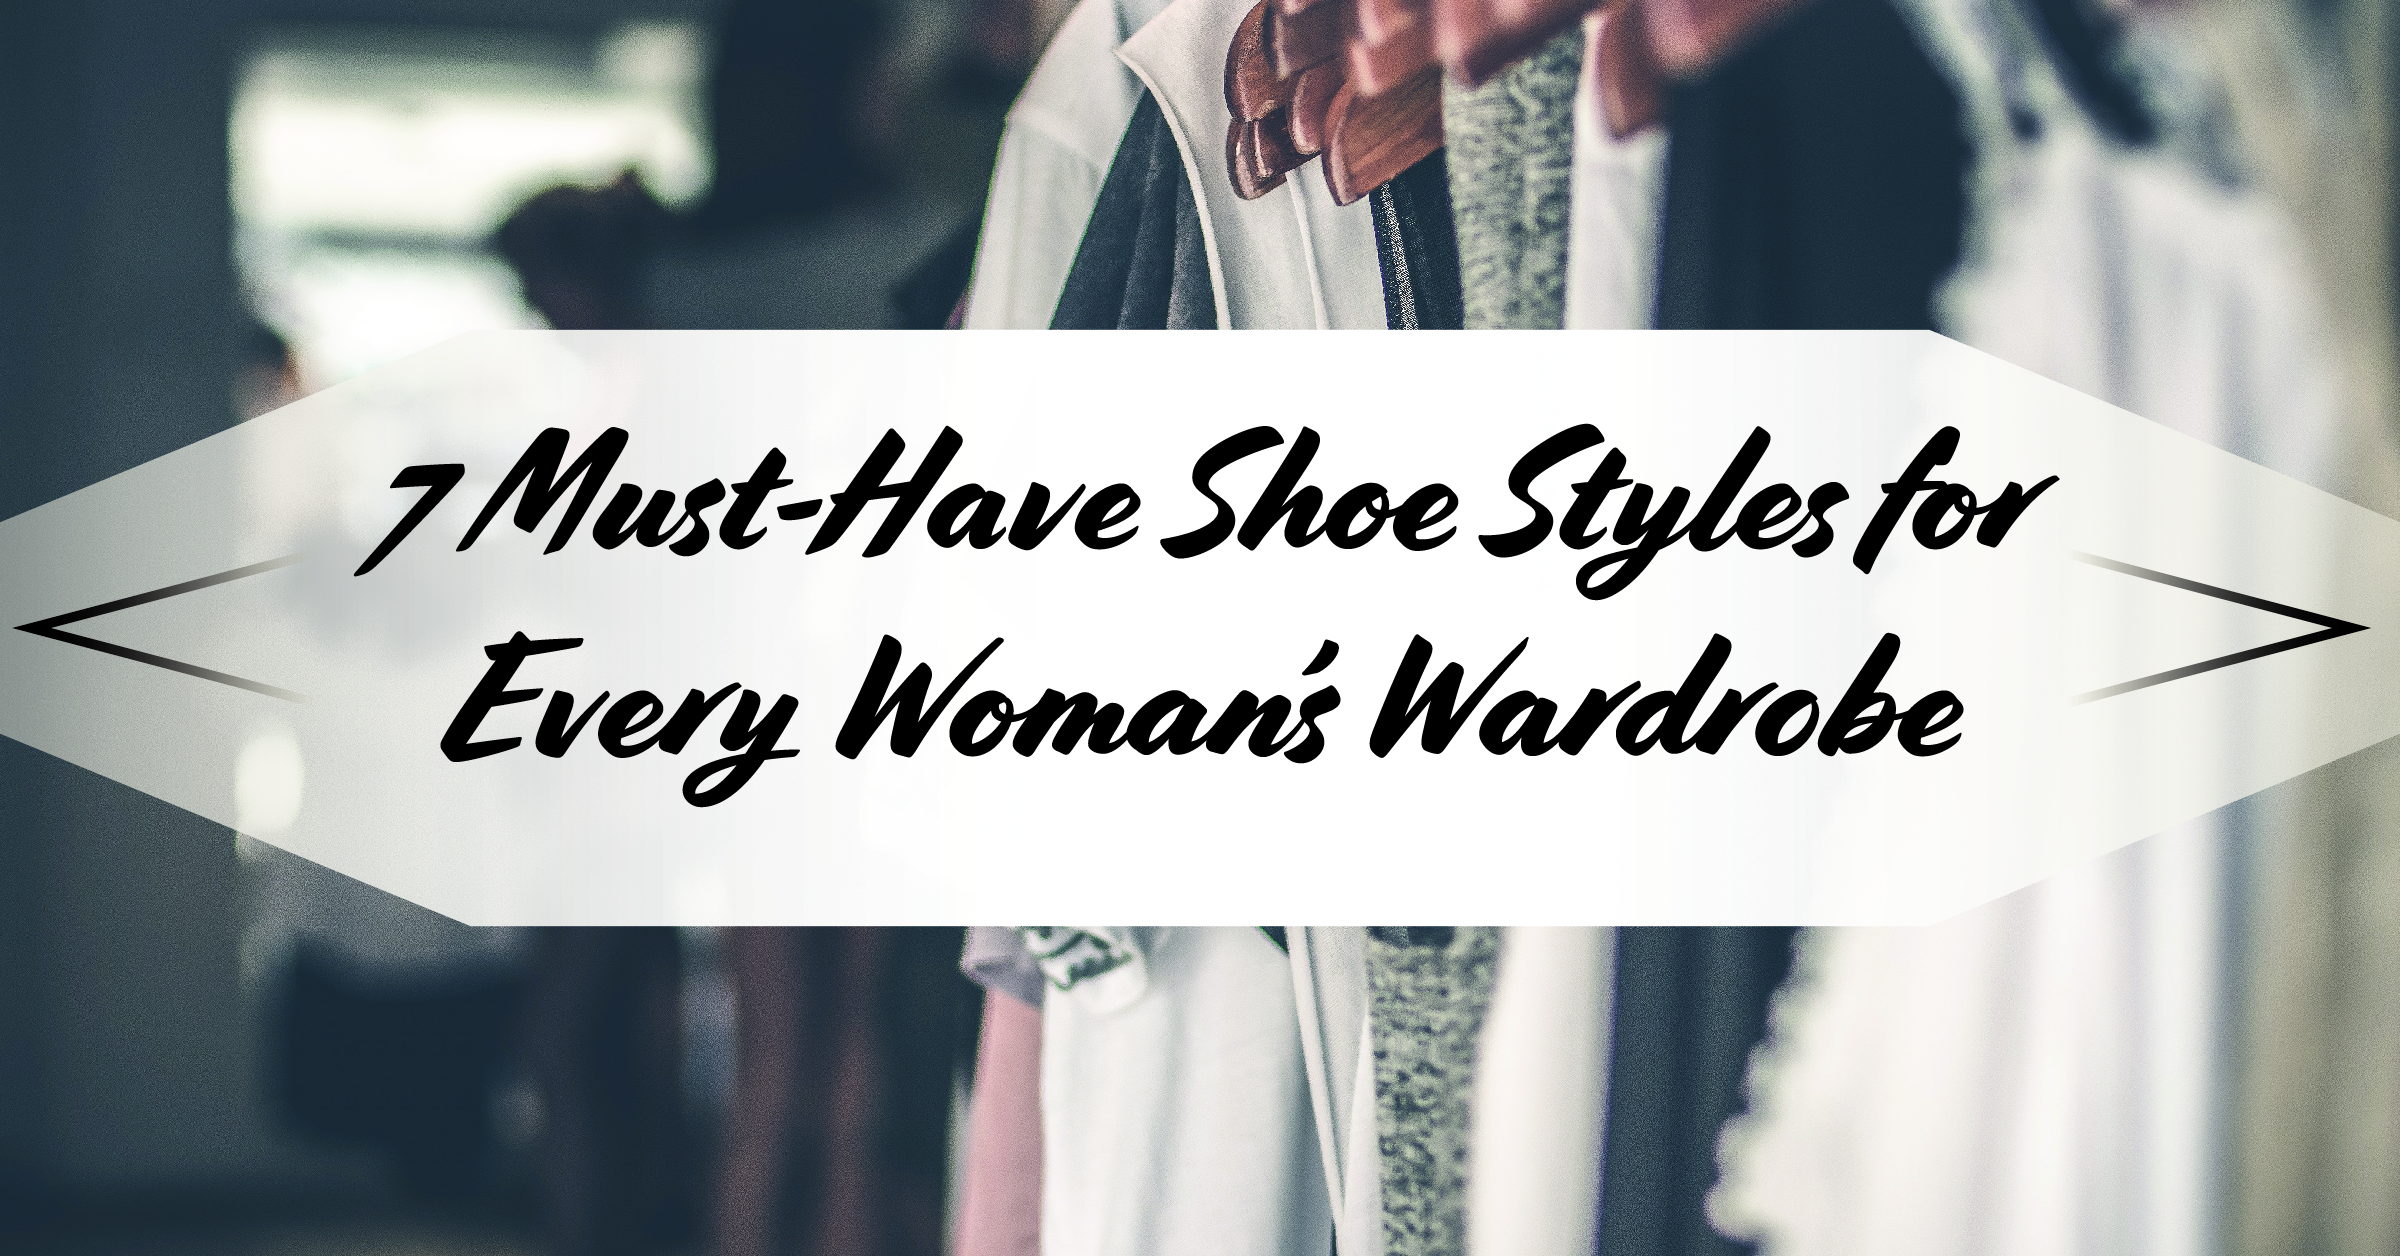 7 Must-Have Shoe Styles For Every Woman's Wardrobe